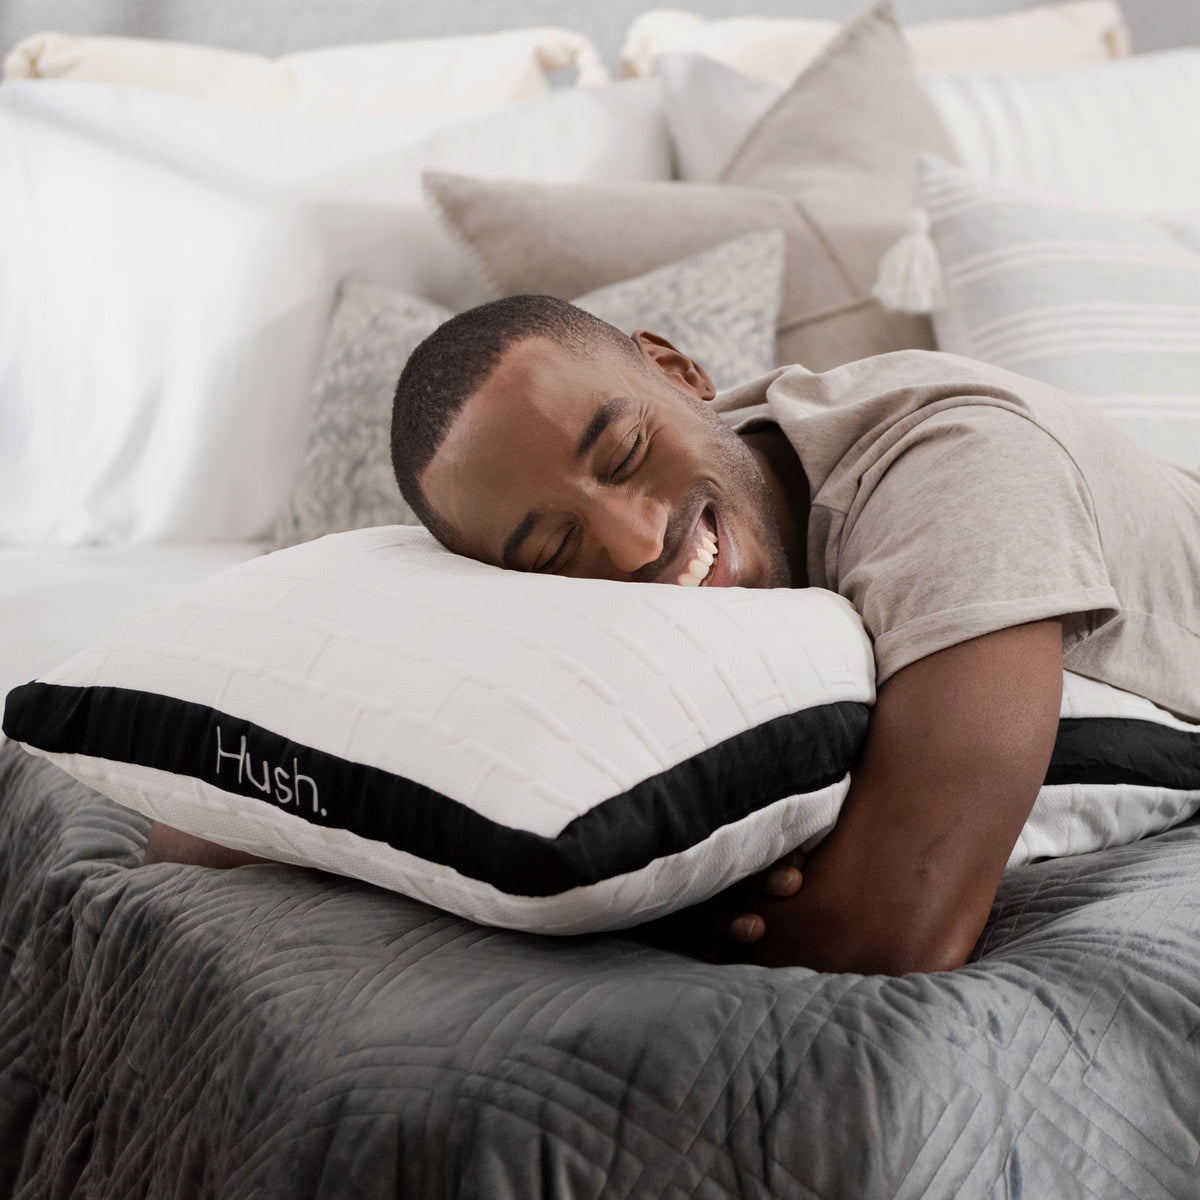 The Coldest Pillow - Adjustable Fill, Washable Cover, and Best for  Breathable Cool Sleep Relief While Sleeping -Premium (Queen)